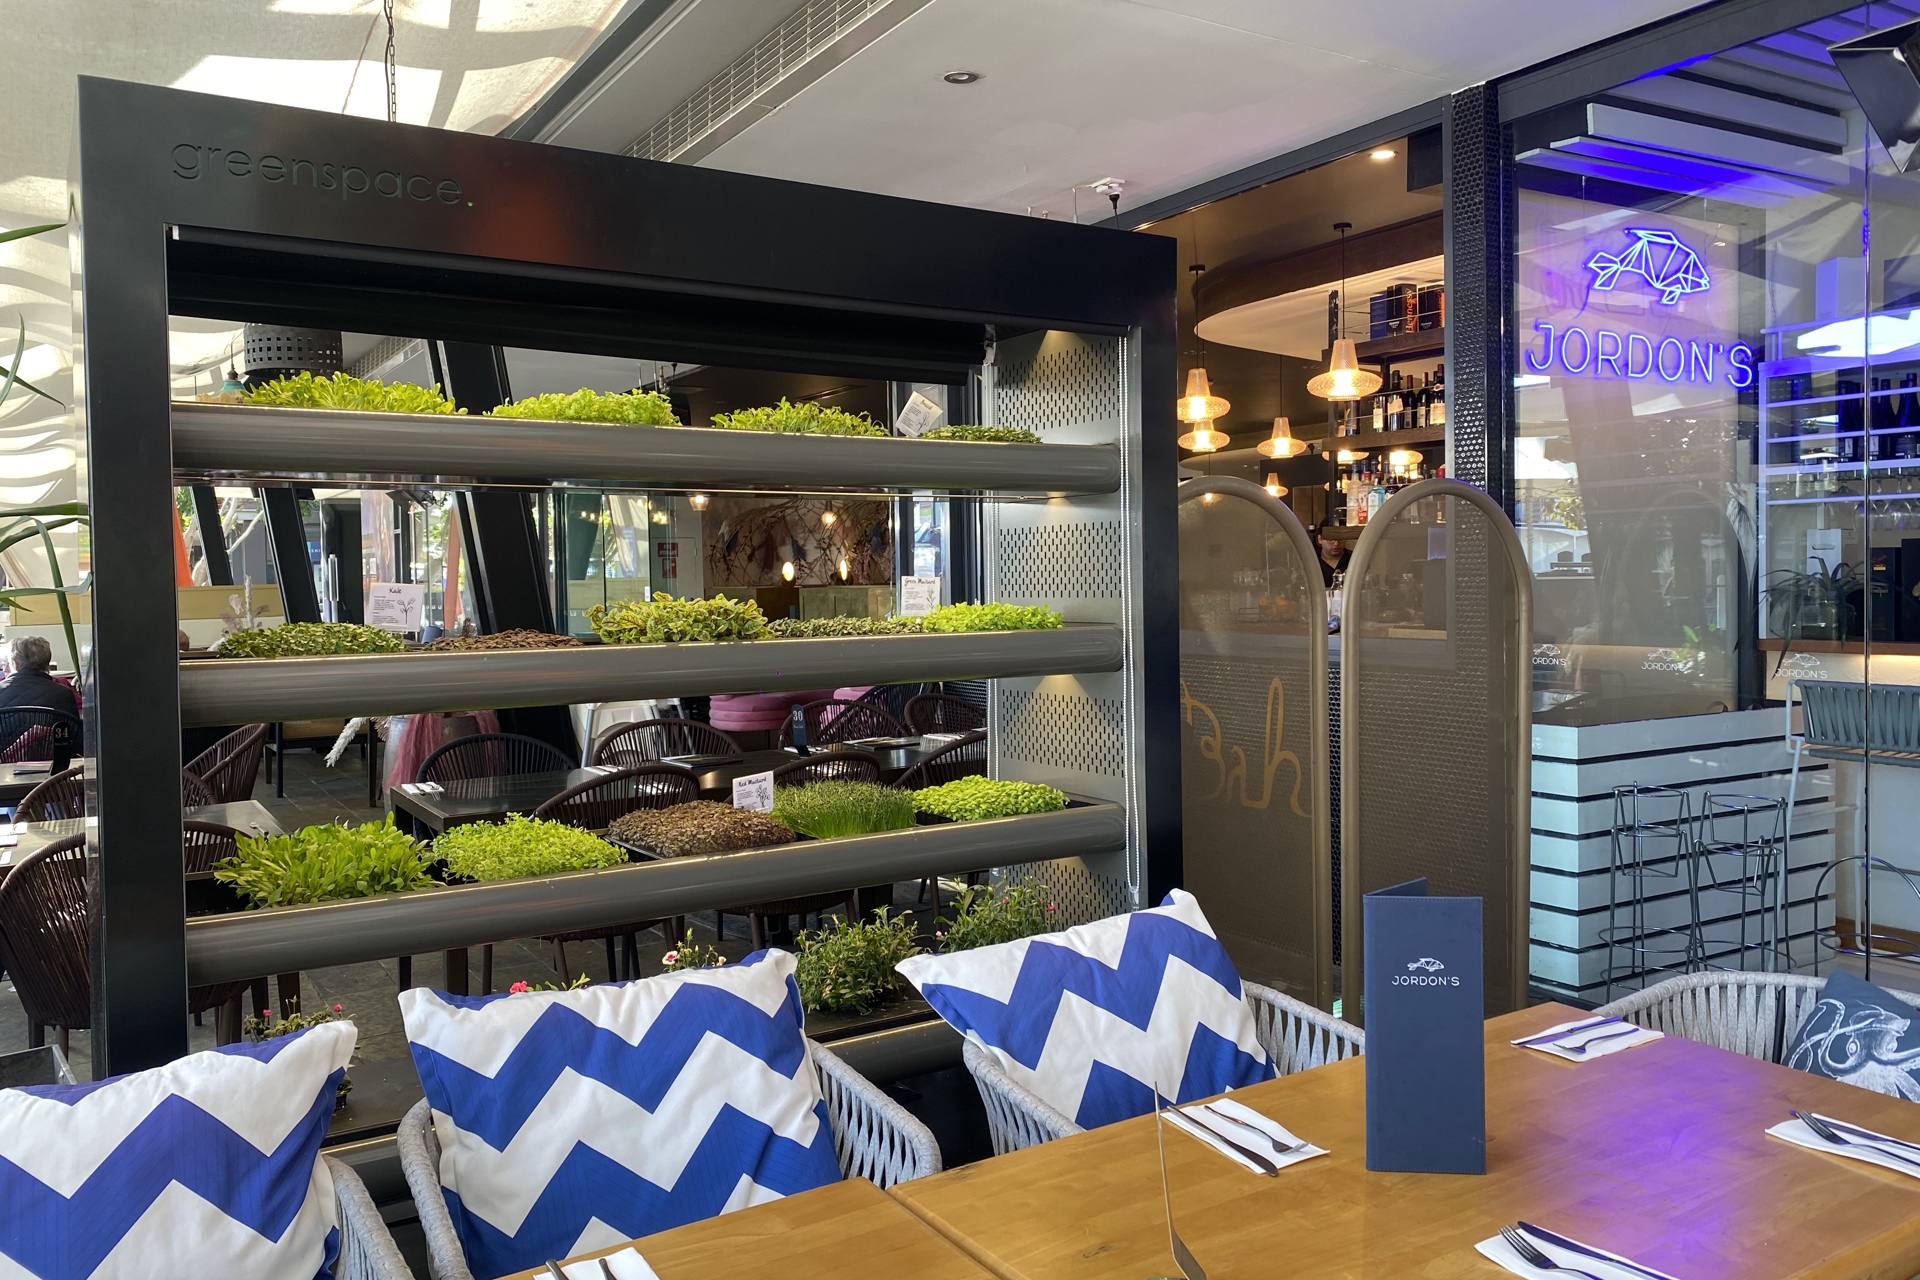 Embracing Sustainable Dining with Greenspace Vertical Garden At Jordon's Seafood